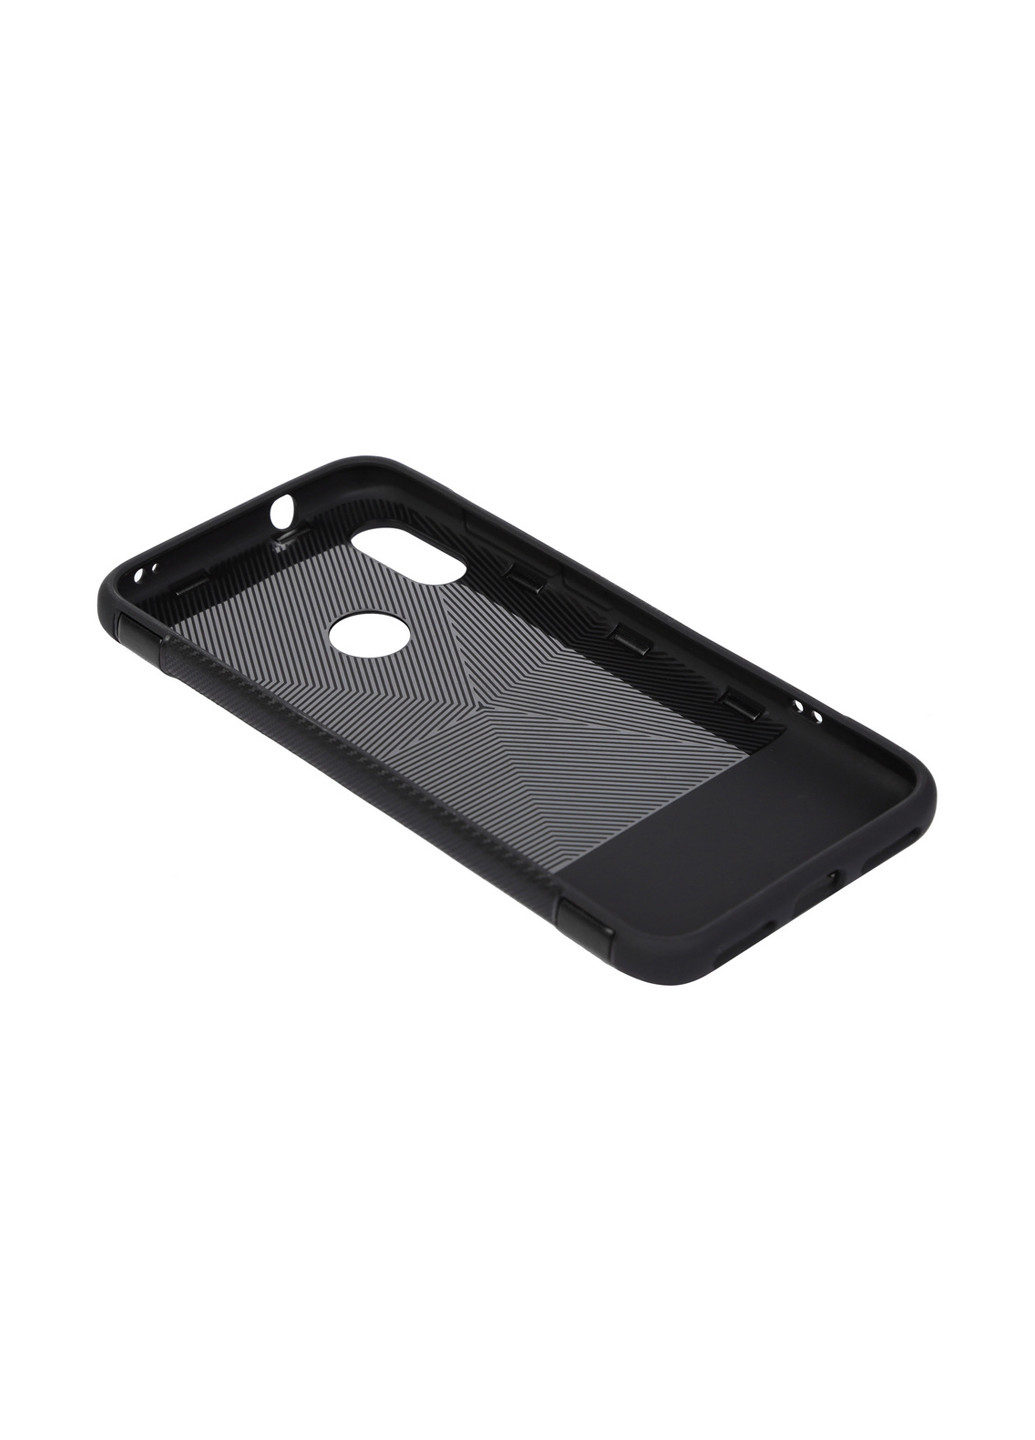 Чехол Magnetic Ring Stand для Xiaomi Redmi Note 6 Pro Black (703089) BeCover magnetic ring stand для xiaomi redmi note 6 pro black (703089) (147838020)